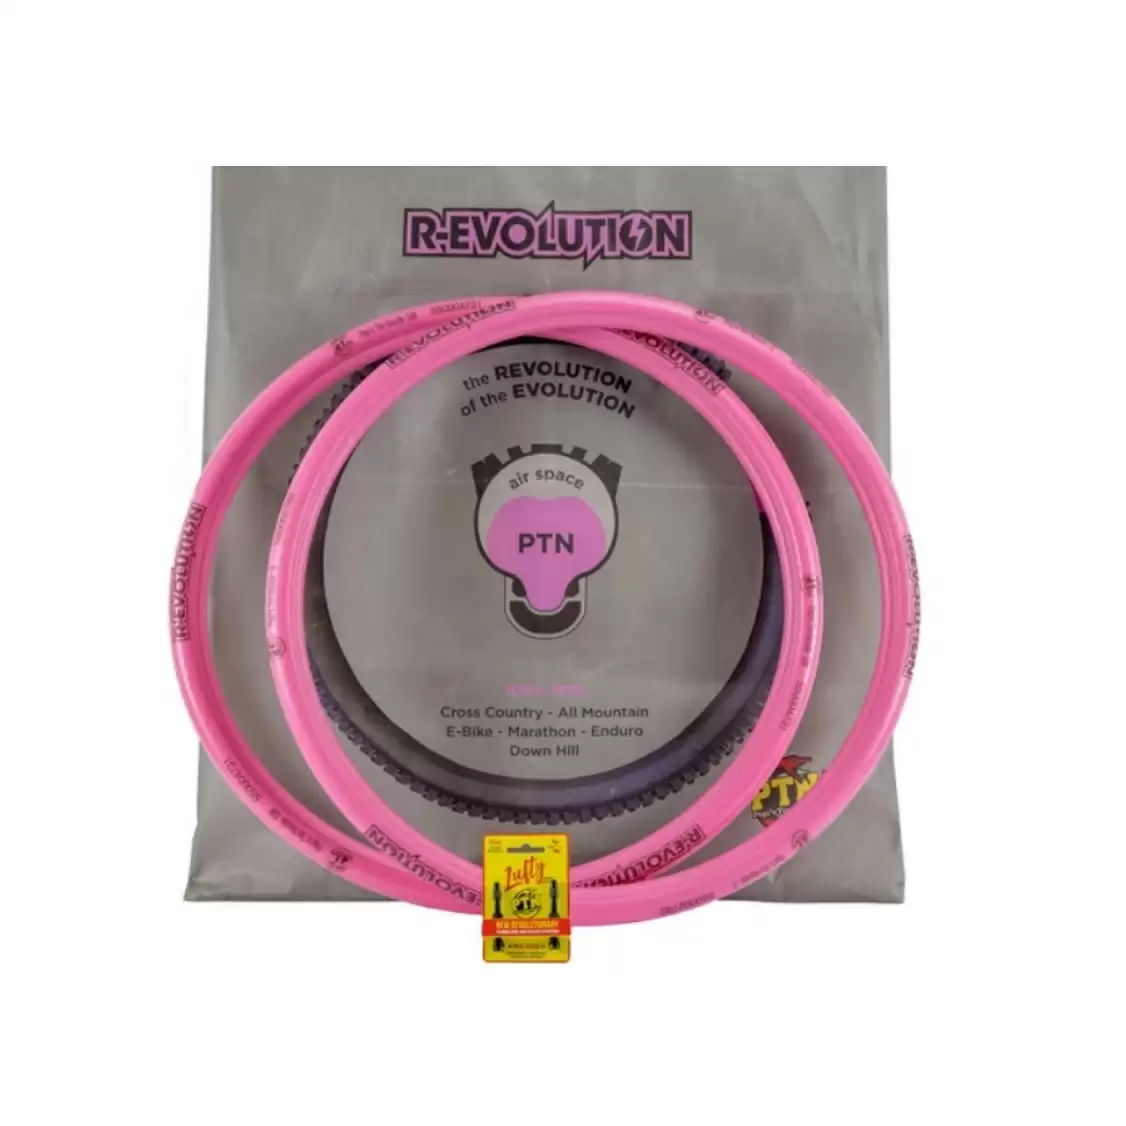 Tubeless kit R-Evolution puncture prevention 27,5 size S/M pink - image